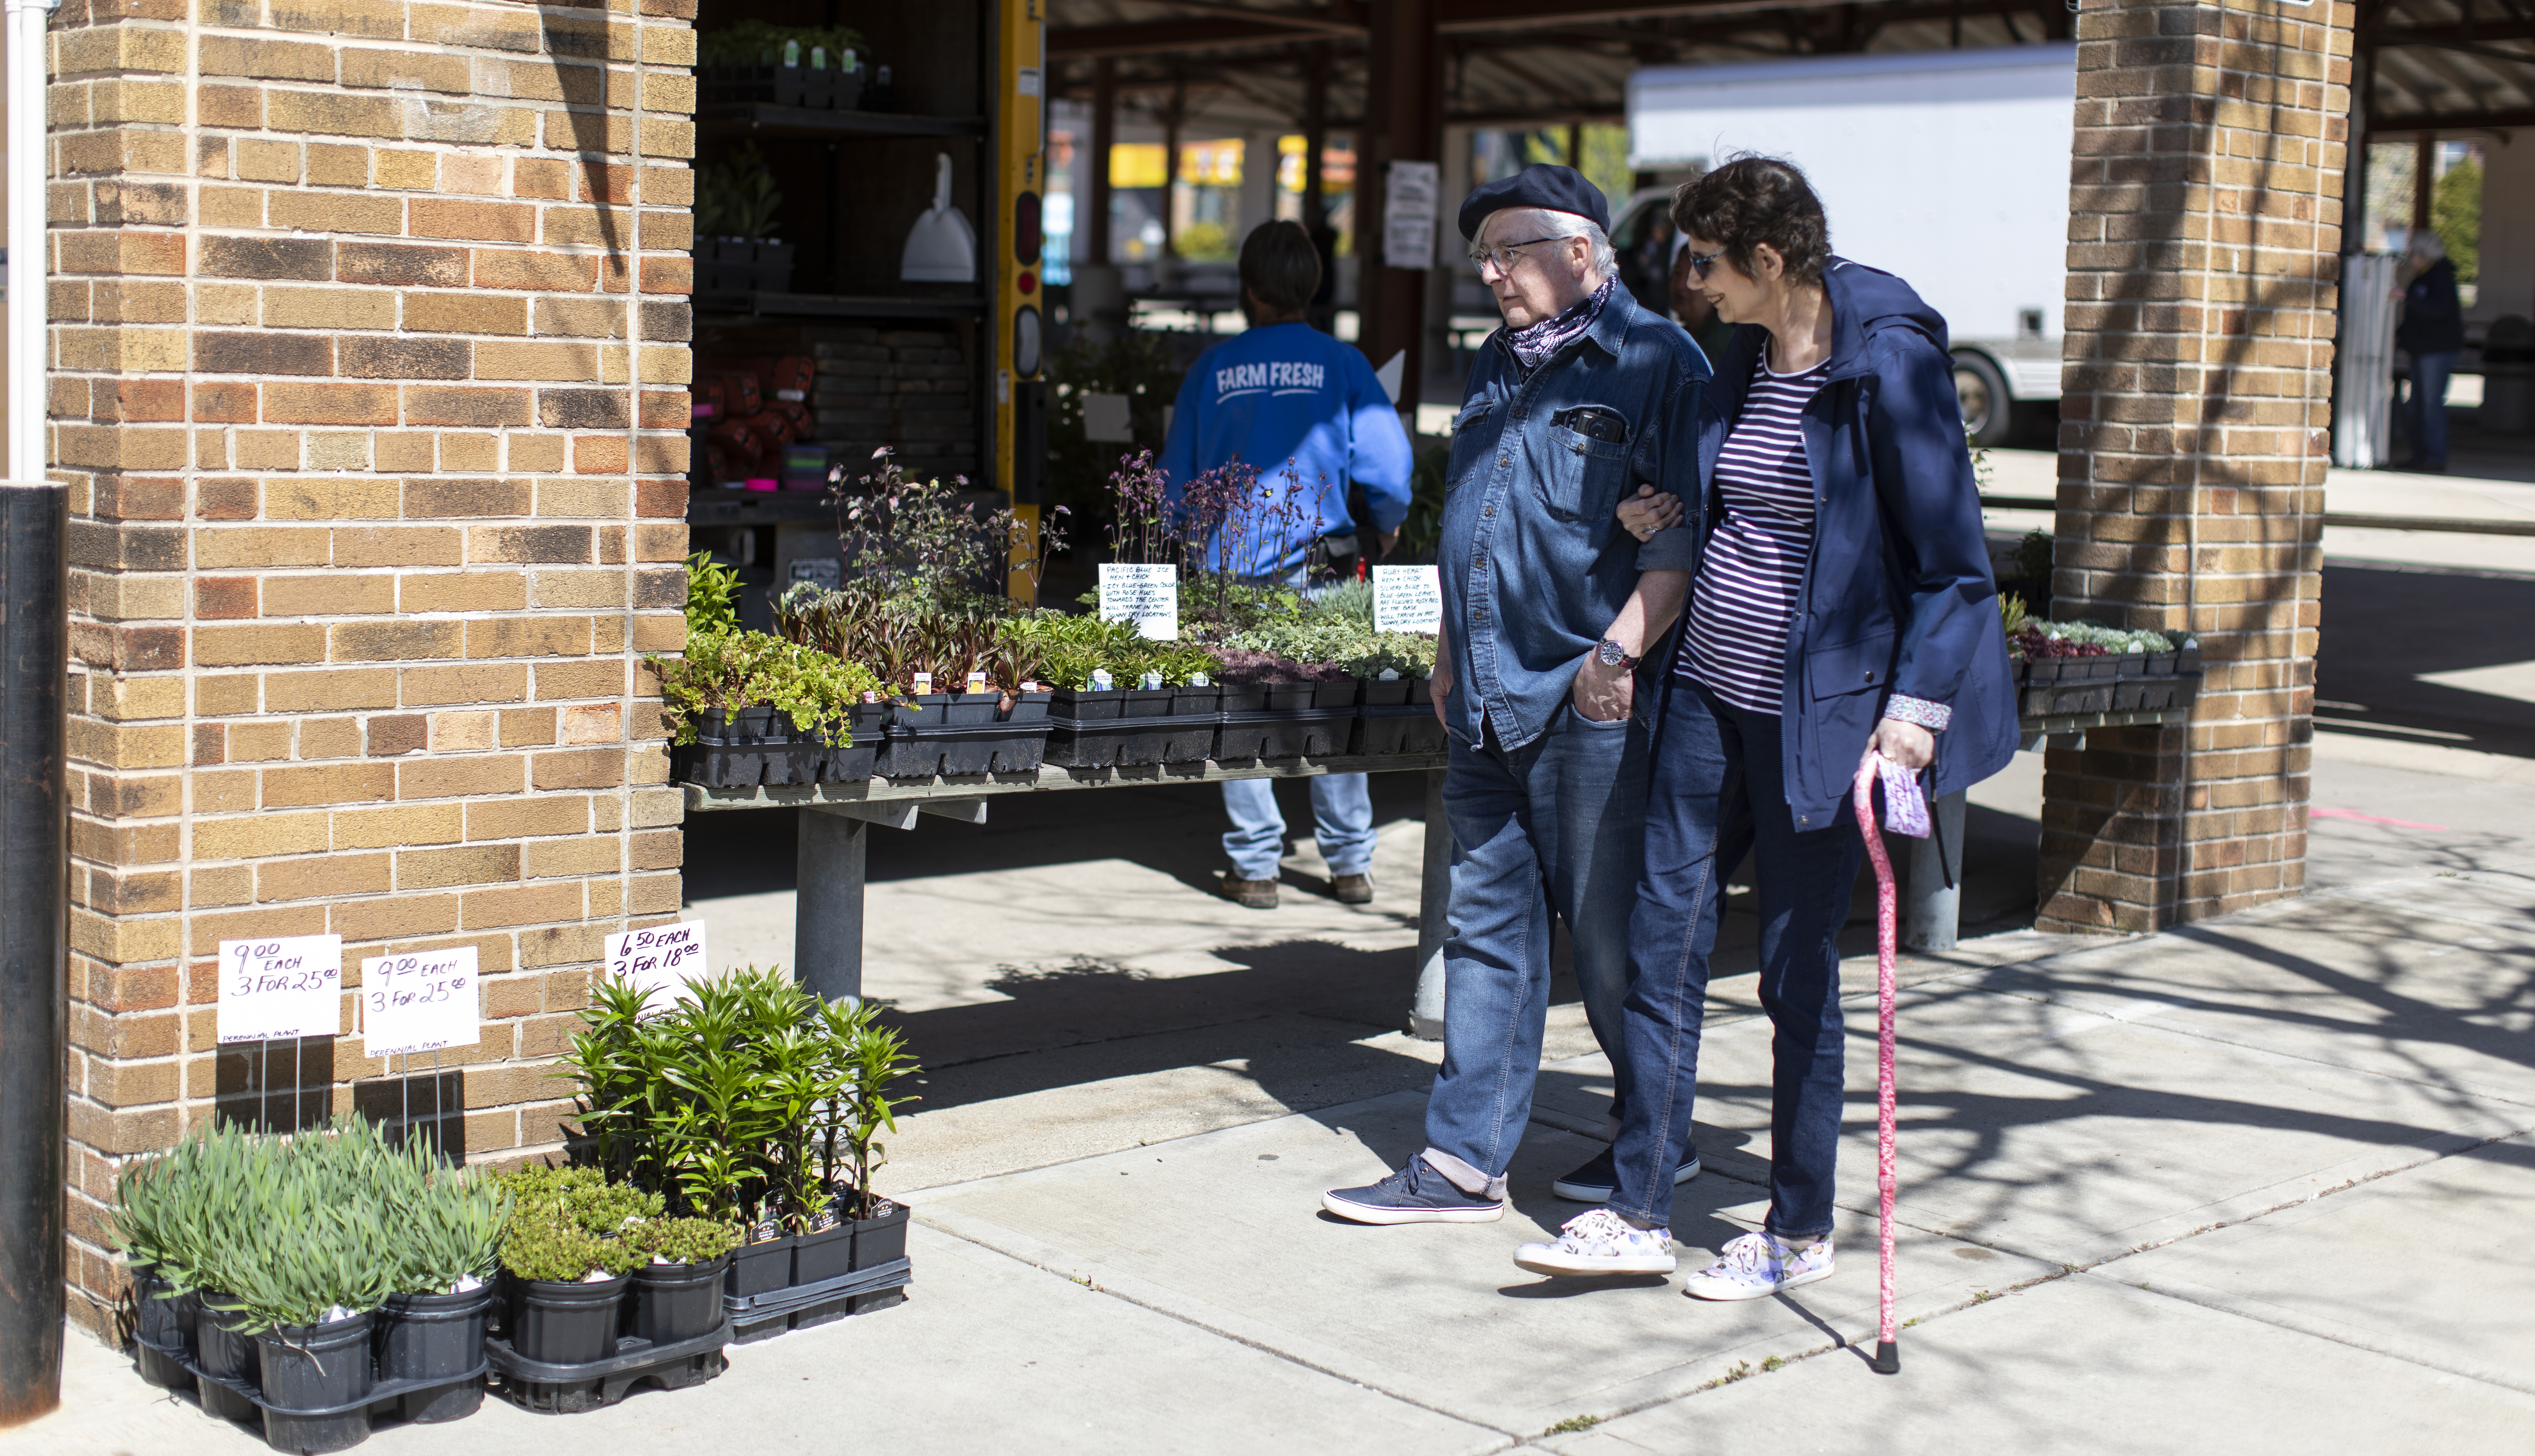 A older man and woman walk past a shop with plants for sale